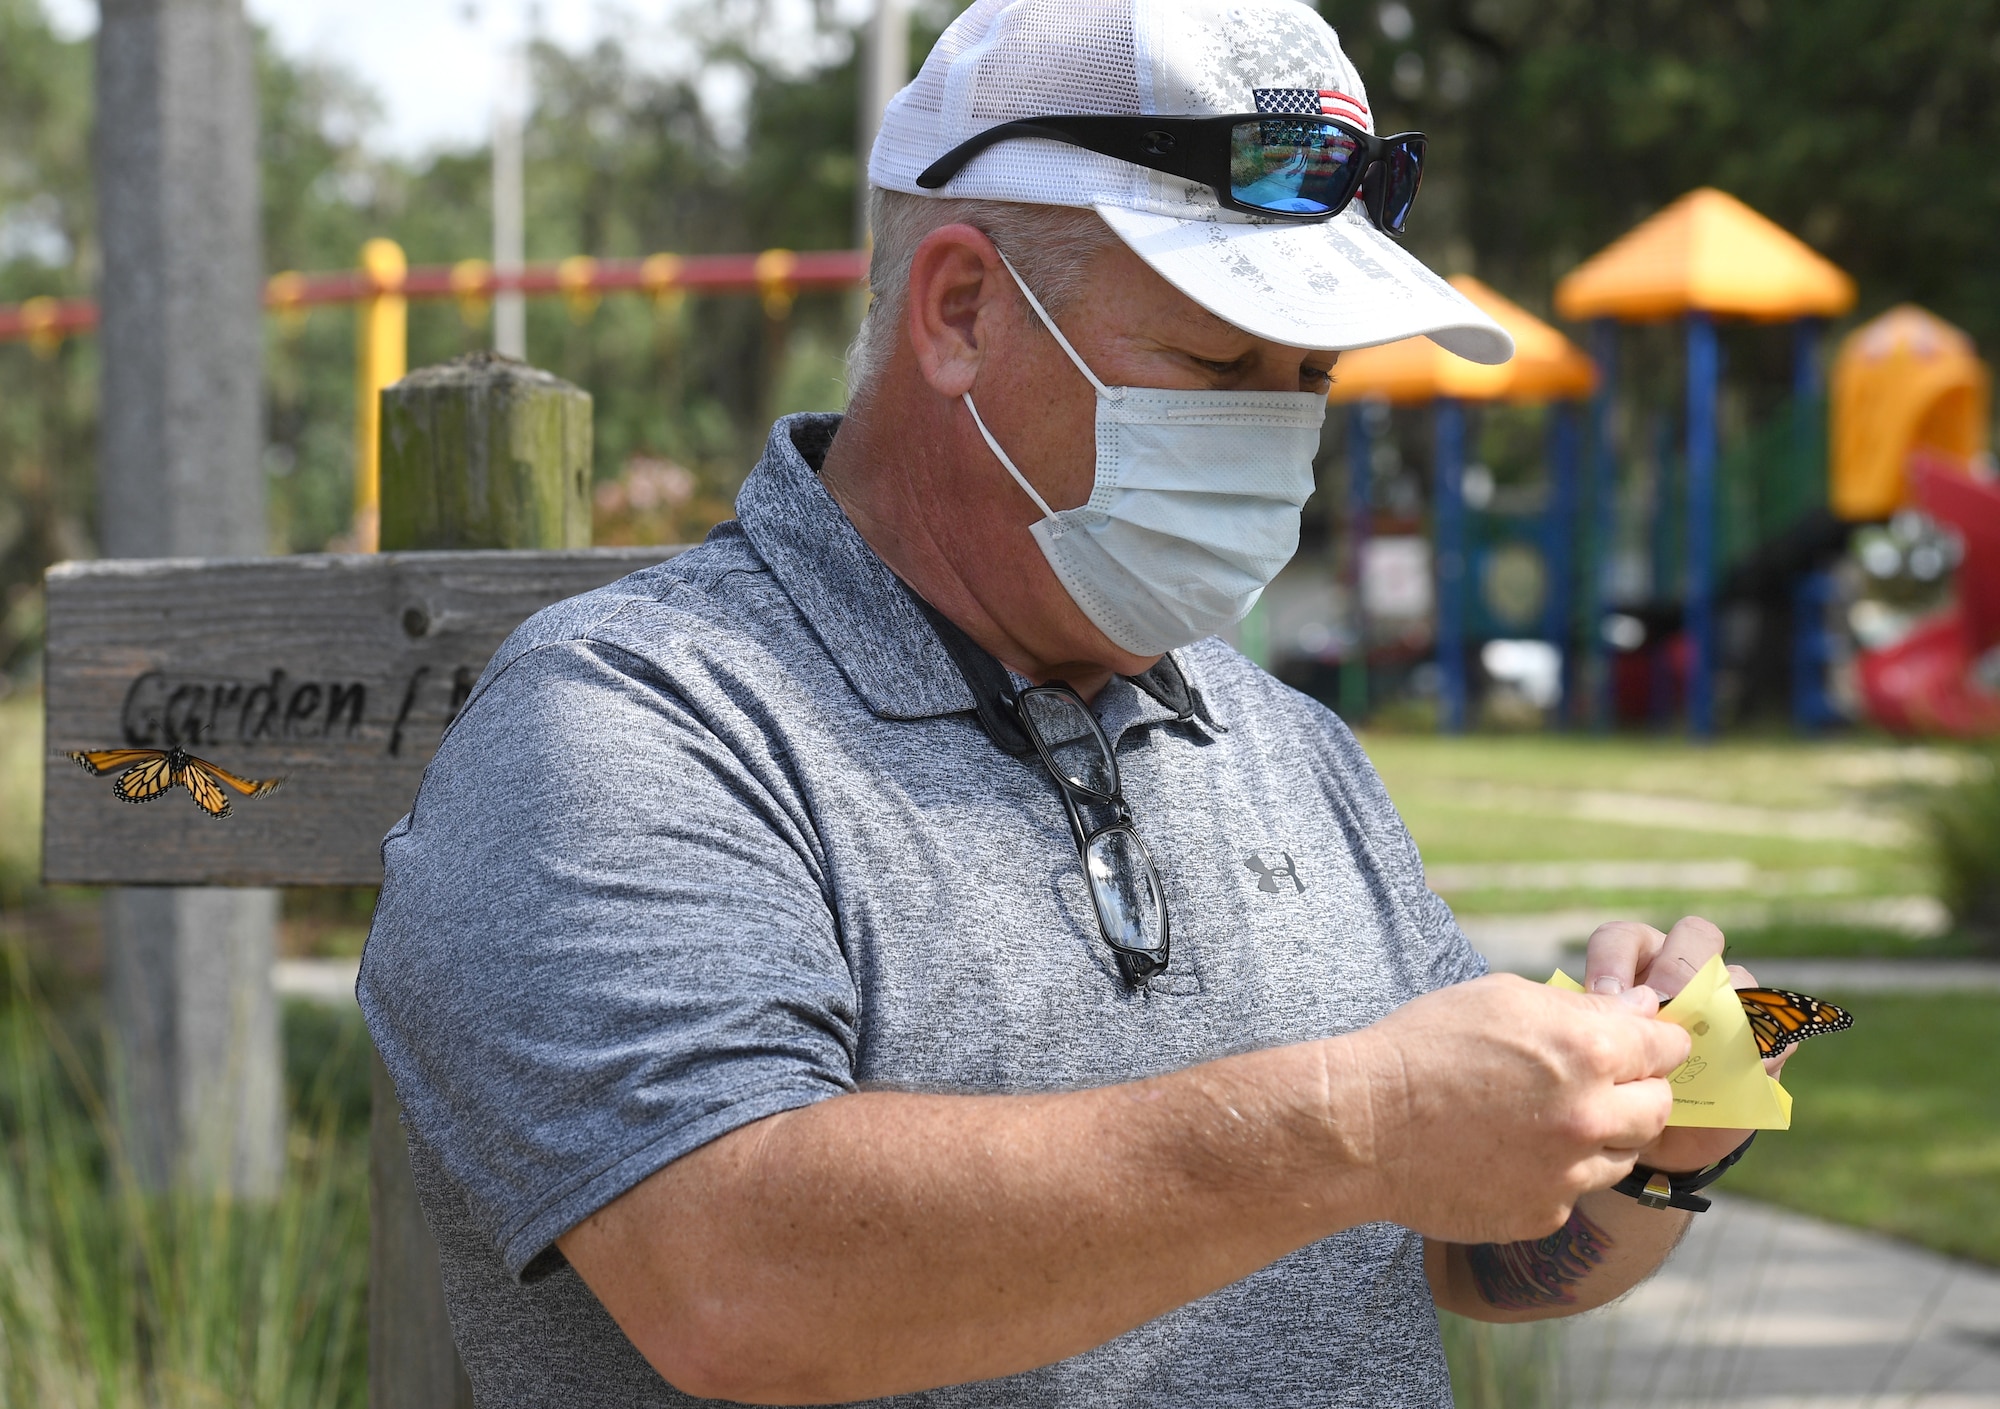 Mike Bradford releases a butterfly in memory of his son, U.S. Air Force Airman 1st Class Brian Bradford, during the Butterfly Release Ceremony honoring Keesler's Fallen Heroes at the Marina at Keesler Air Force Base, Mississippi, Sept. 25, 2020. Bradford was killed while deployed Dec. 6, 2018. The event was held in conclusion of Gold Star Family Remembrance Week, which honored the families of fallen service members. (U.S. Air Force photo by Kemberly Groue)